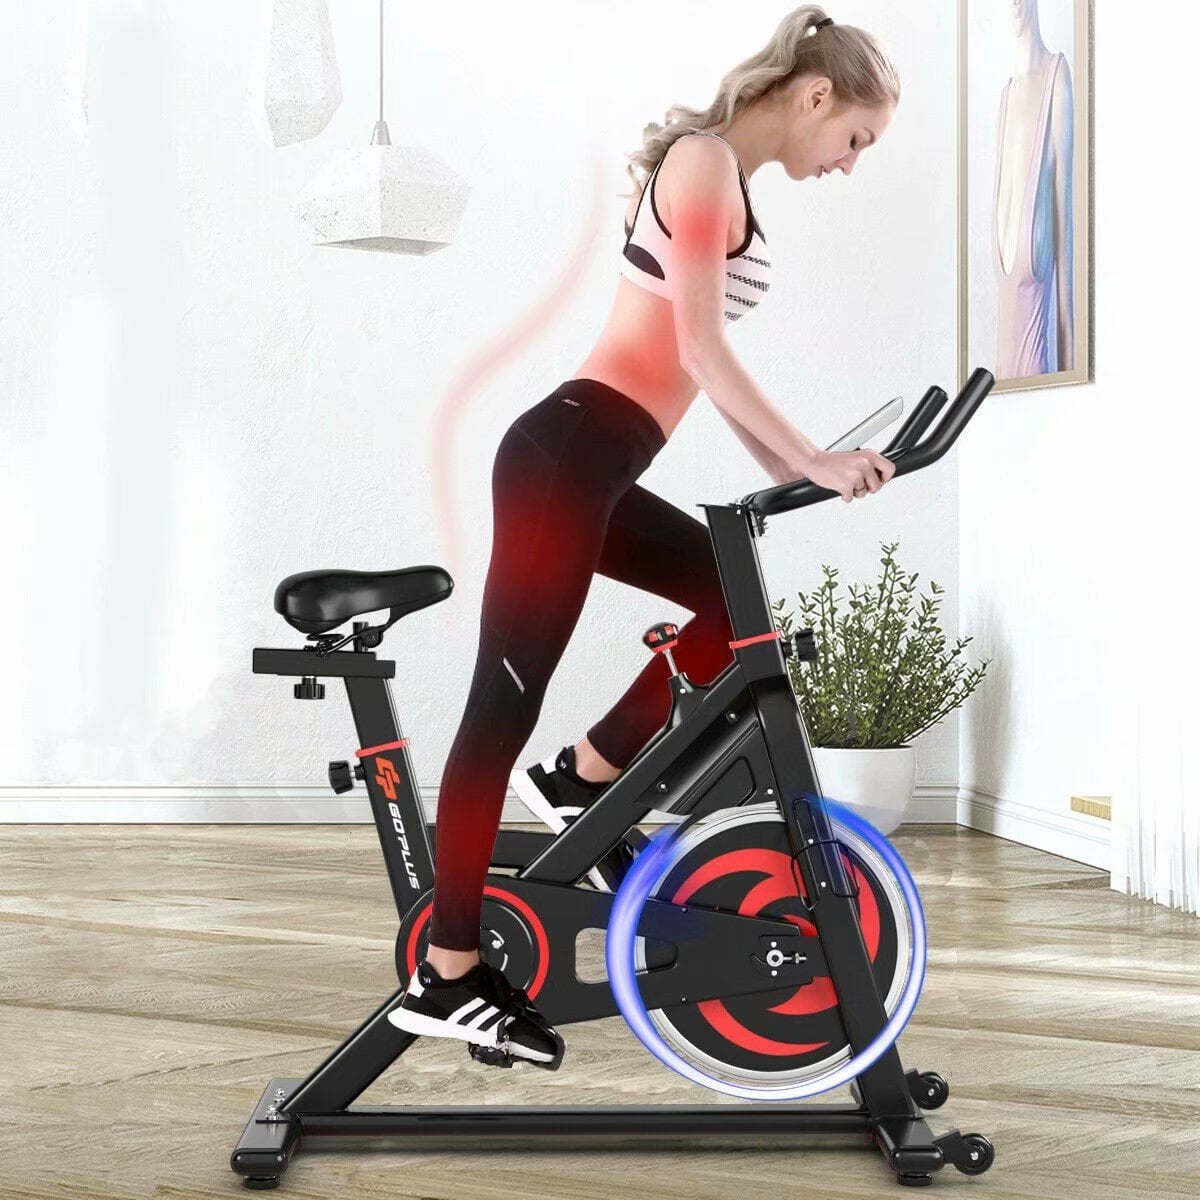 goplus stationary exercise magnetic cycling bike 30lbs flywheel home gym cardio workout